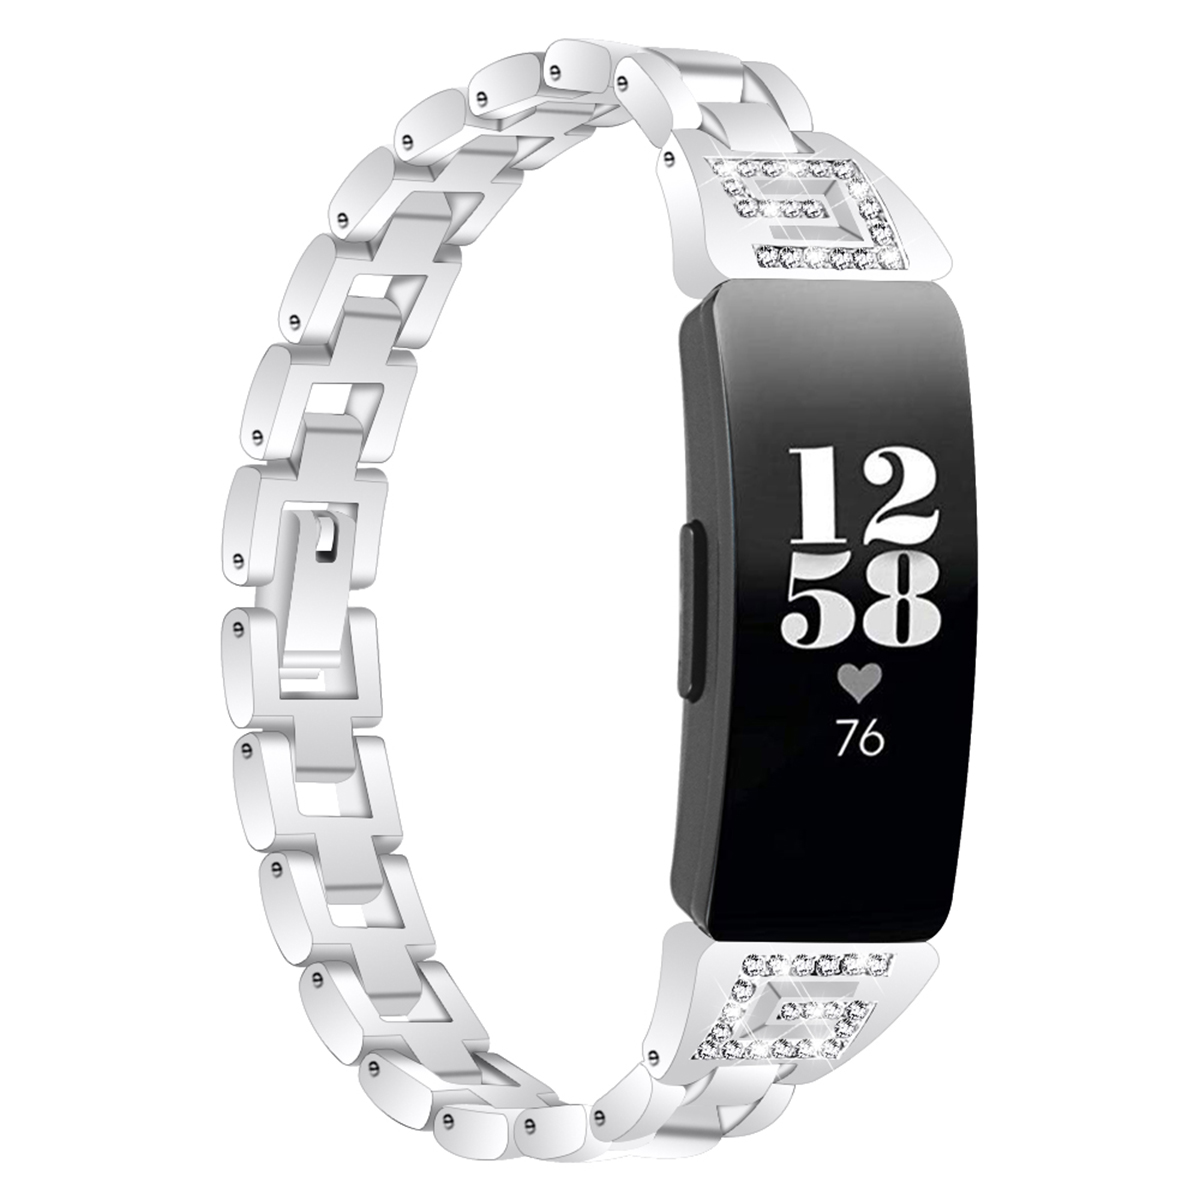 Bakeey-Watch-band-Stainless-Steel-Watch-Strap-For-Fitbit-InspireHR-1607091-4